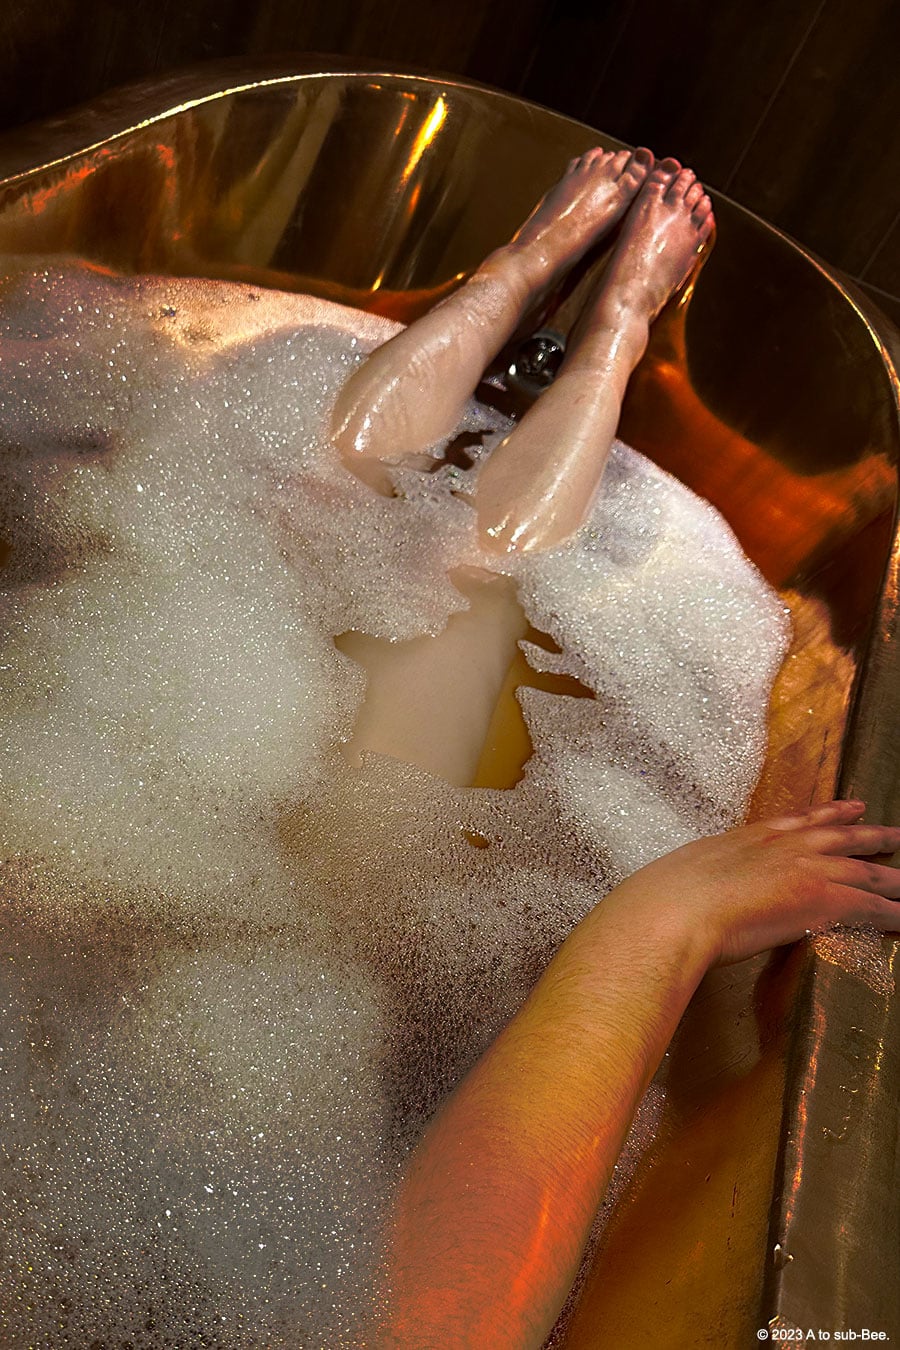 A person laying naked in a copper roll top bath covered in bubbles, pampering themselves